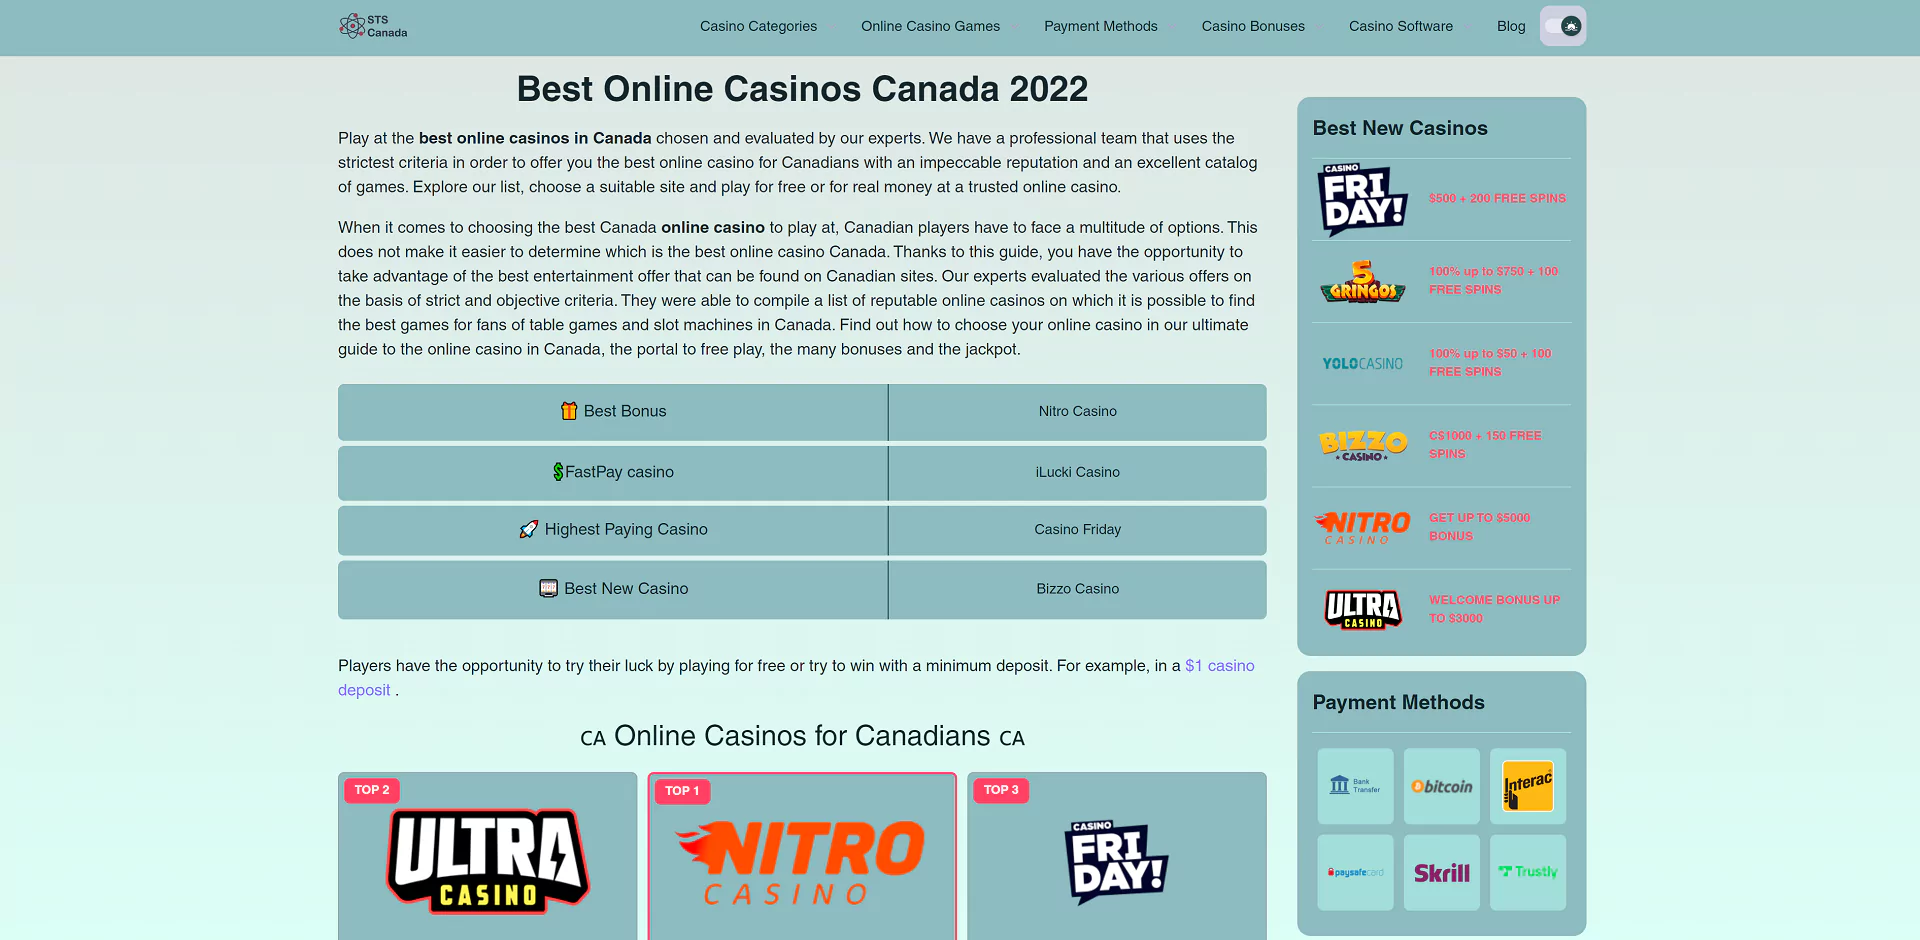 Top 10 online casinos Canada Accounts To Follow On Twitter